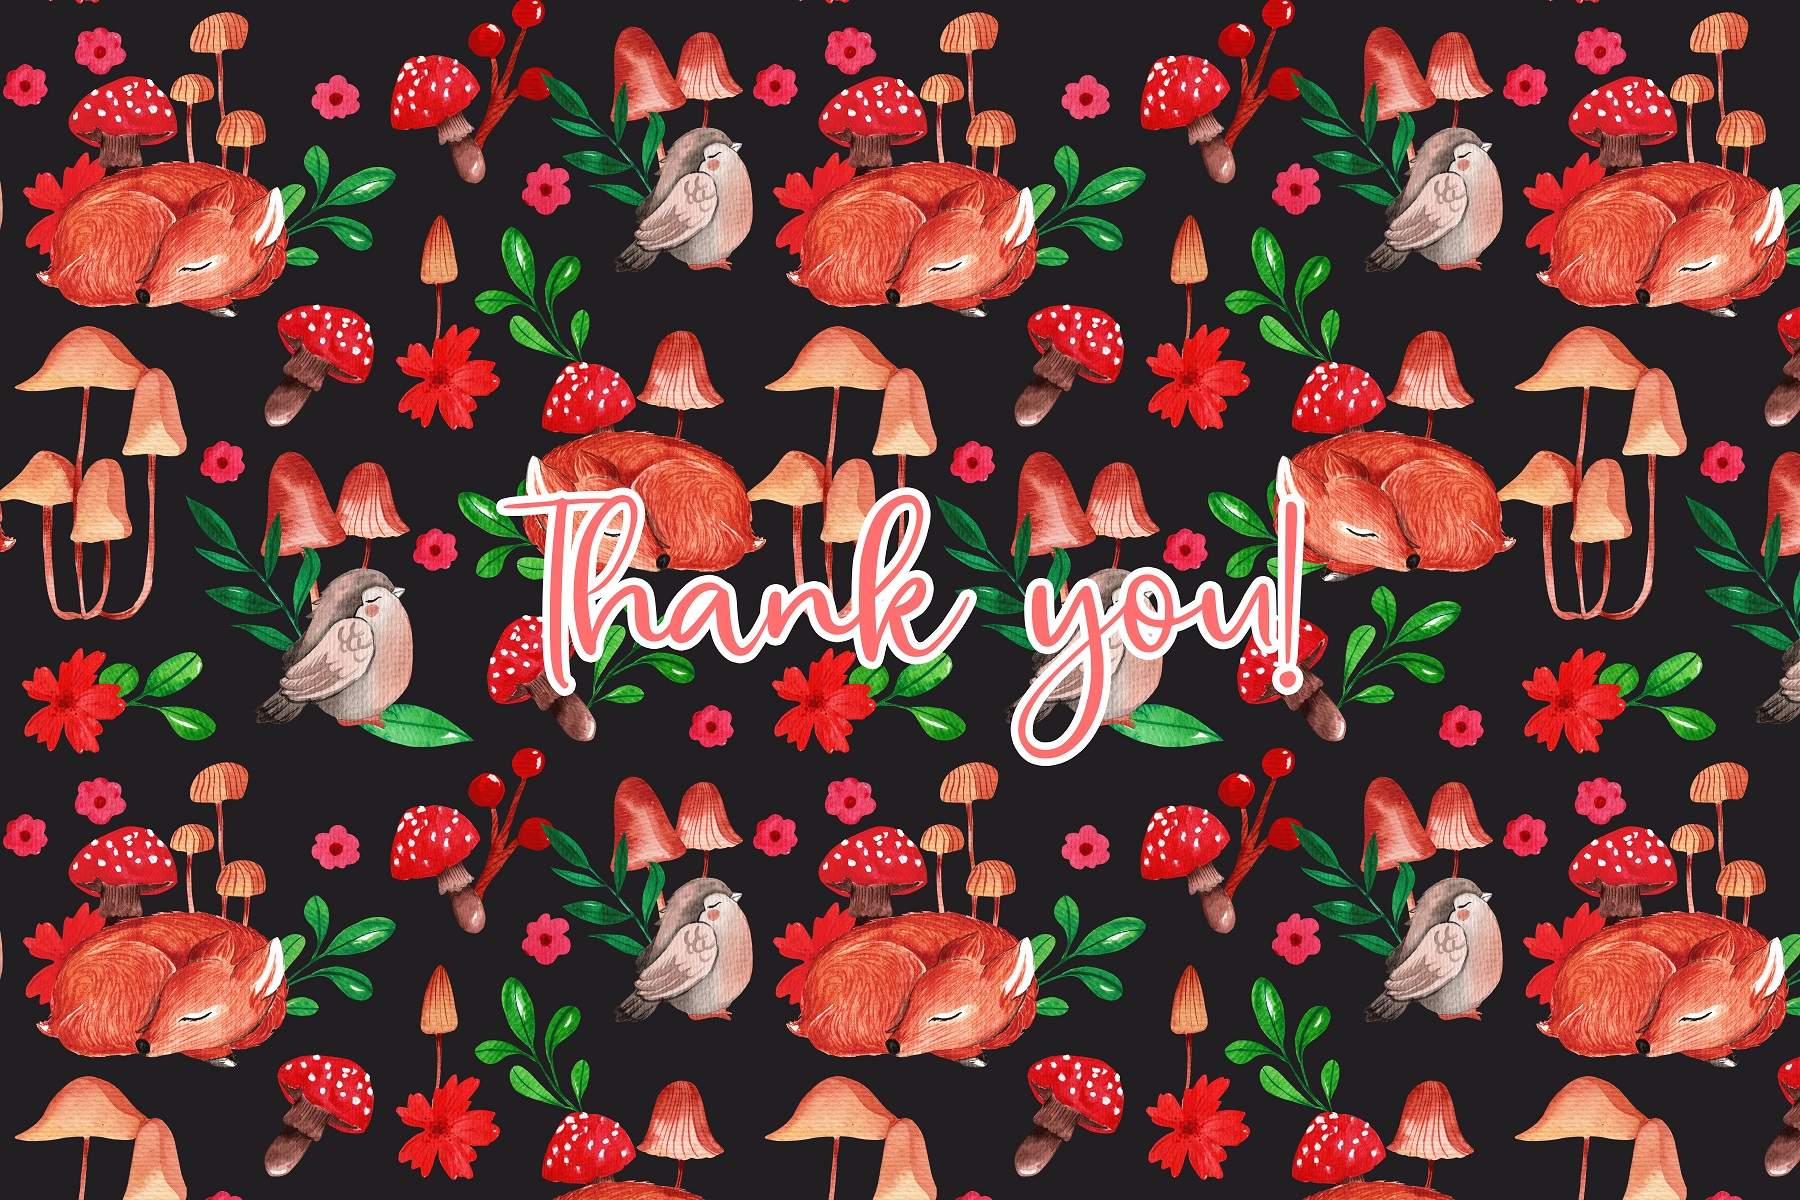 Black background with red flowers and mushrooms with the words thank you.